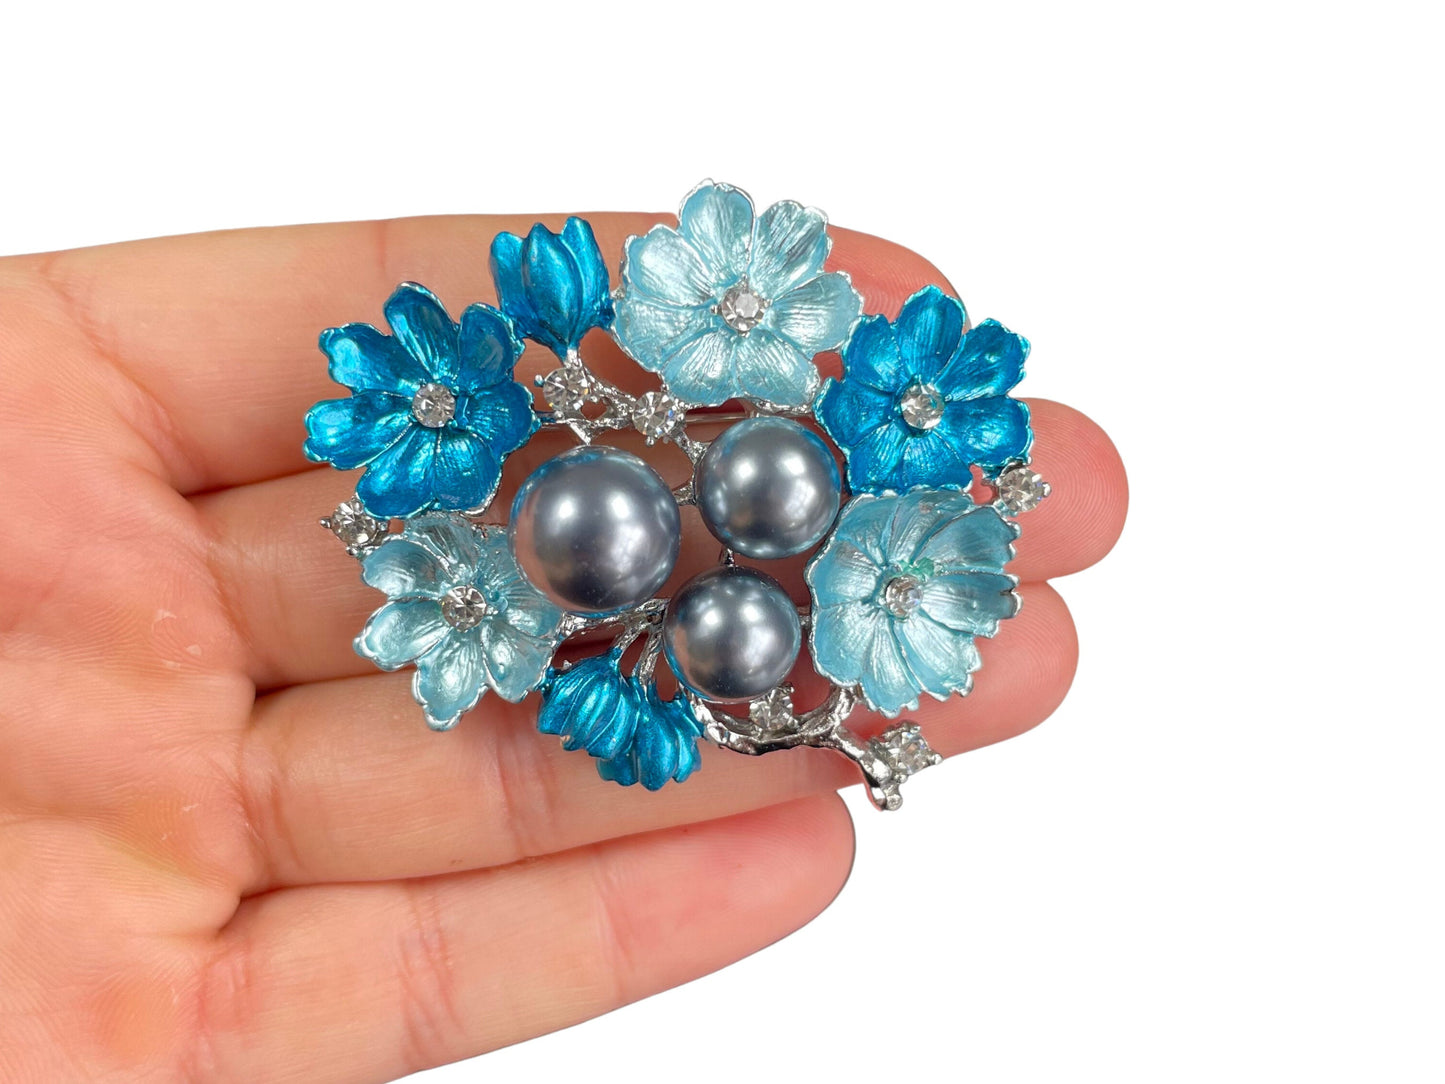 Elegant Blue Flower And Pearls Brooch Pin / Vintage Look Blue Flower Brooch / Flower Costume Pin / Banquet Flower Brooch / Gift For Her